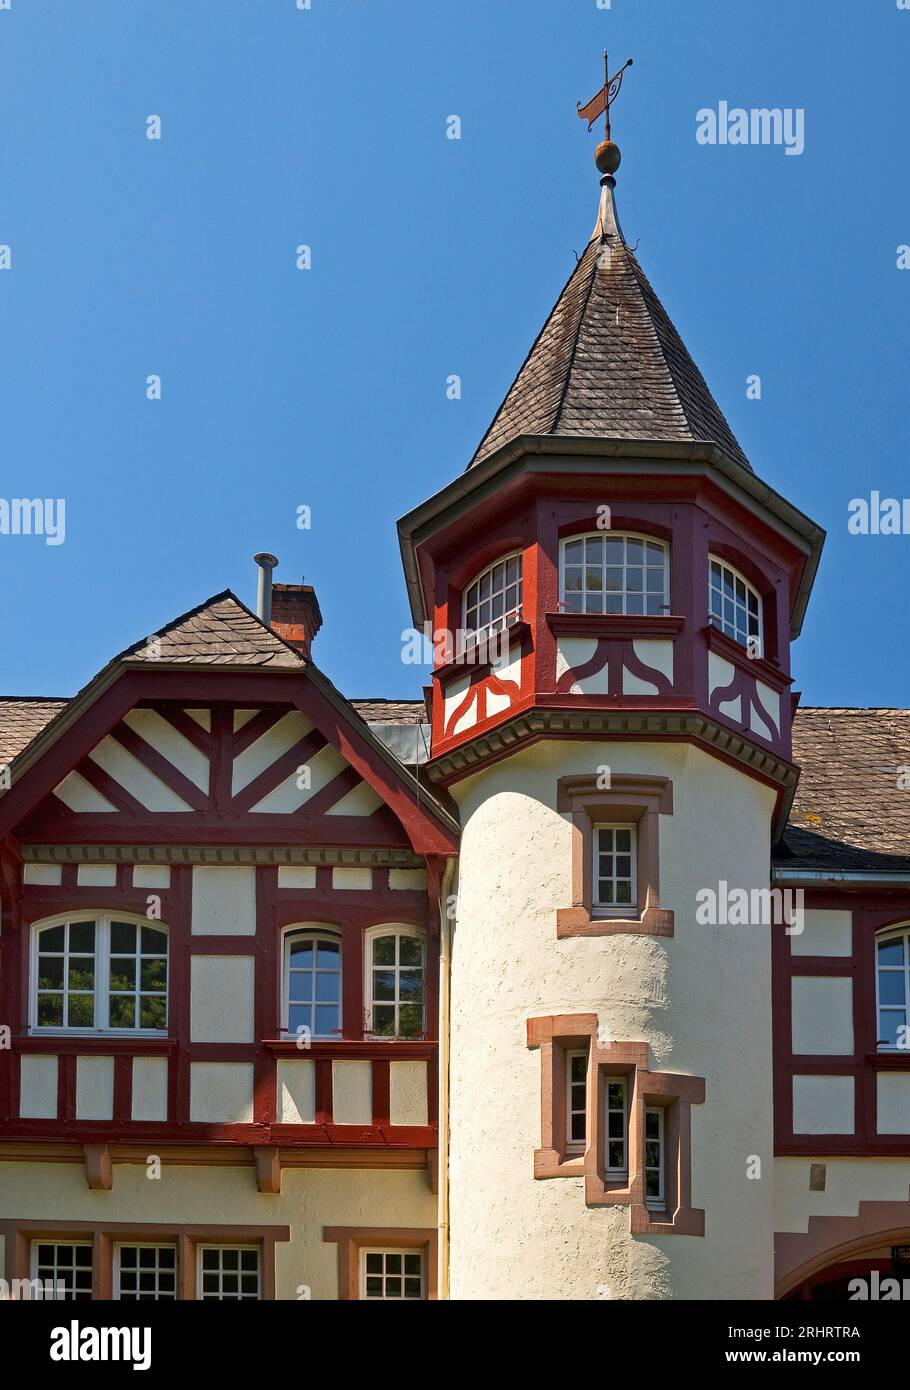 House Alemanns, house of the Alemannia Marburg fraternity, student association, Germany, Hesse, Marburg an der Lahn Stock Photo